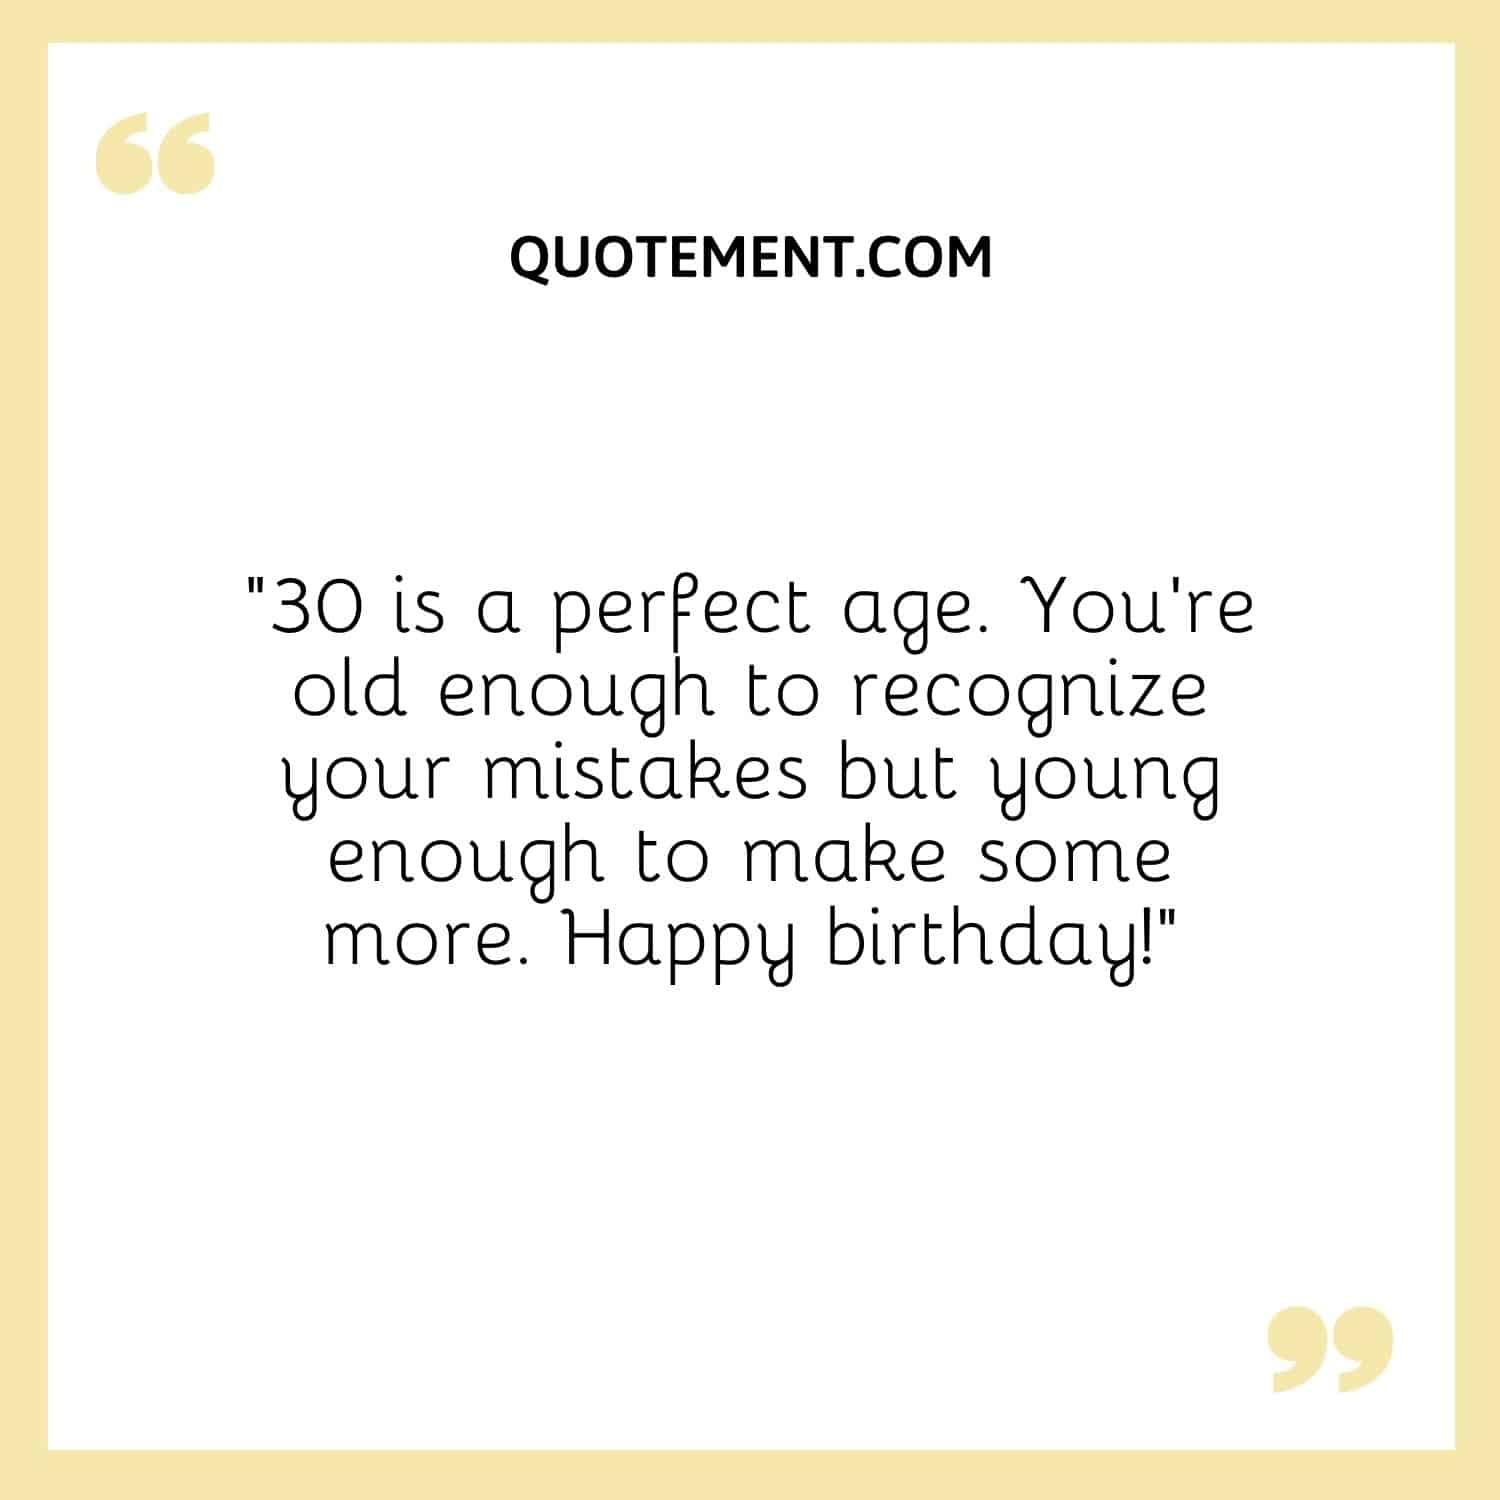 “30 is a perfect age. You’re old enough to recognize your mistakes but young enough to make some more. Happy birthday!”